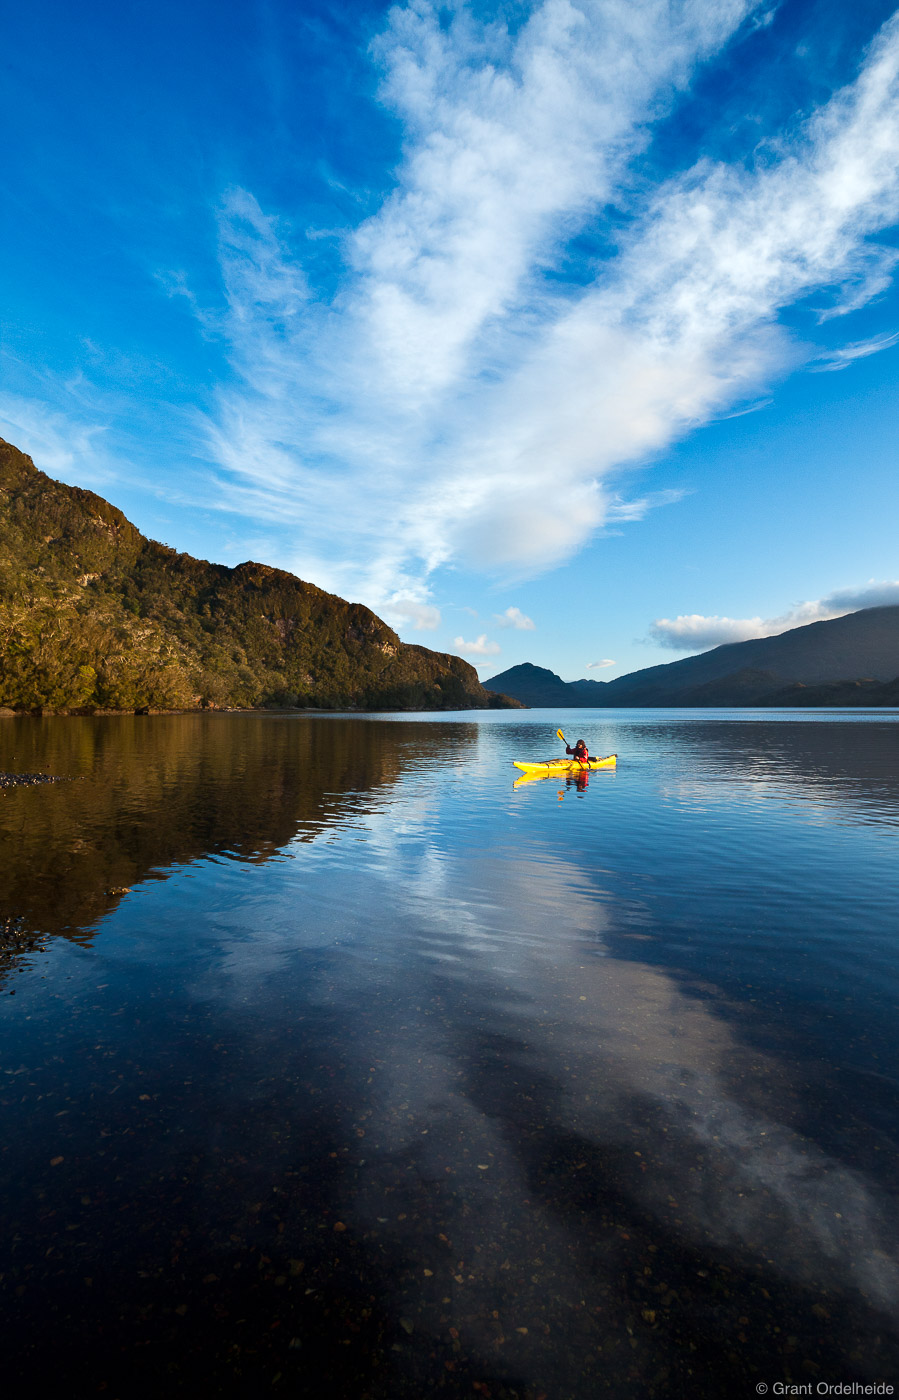 A sea kayaker on the still waters of Isla Kent.